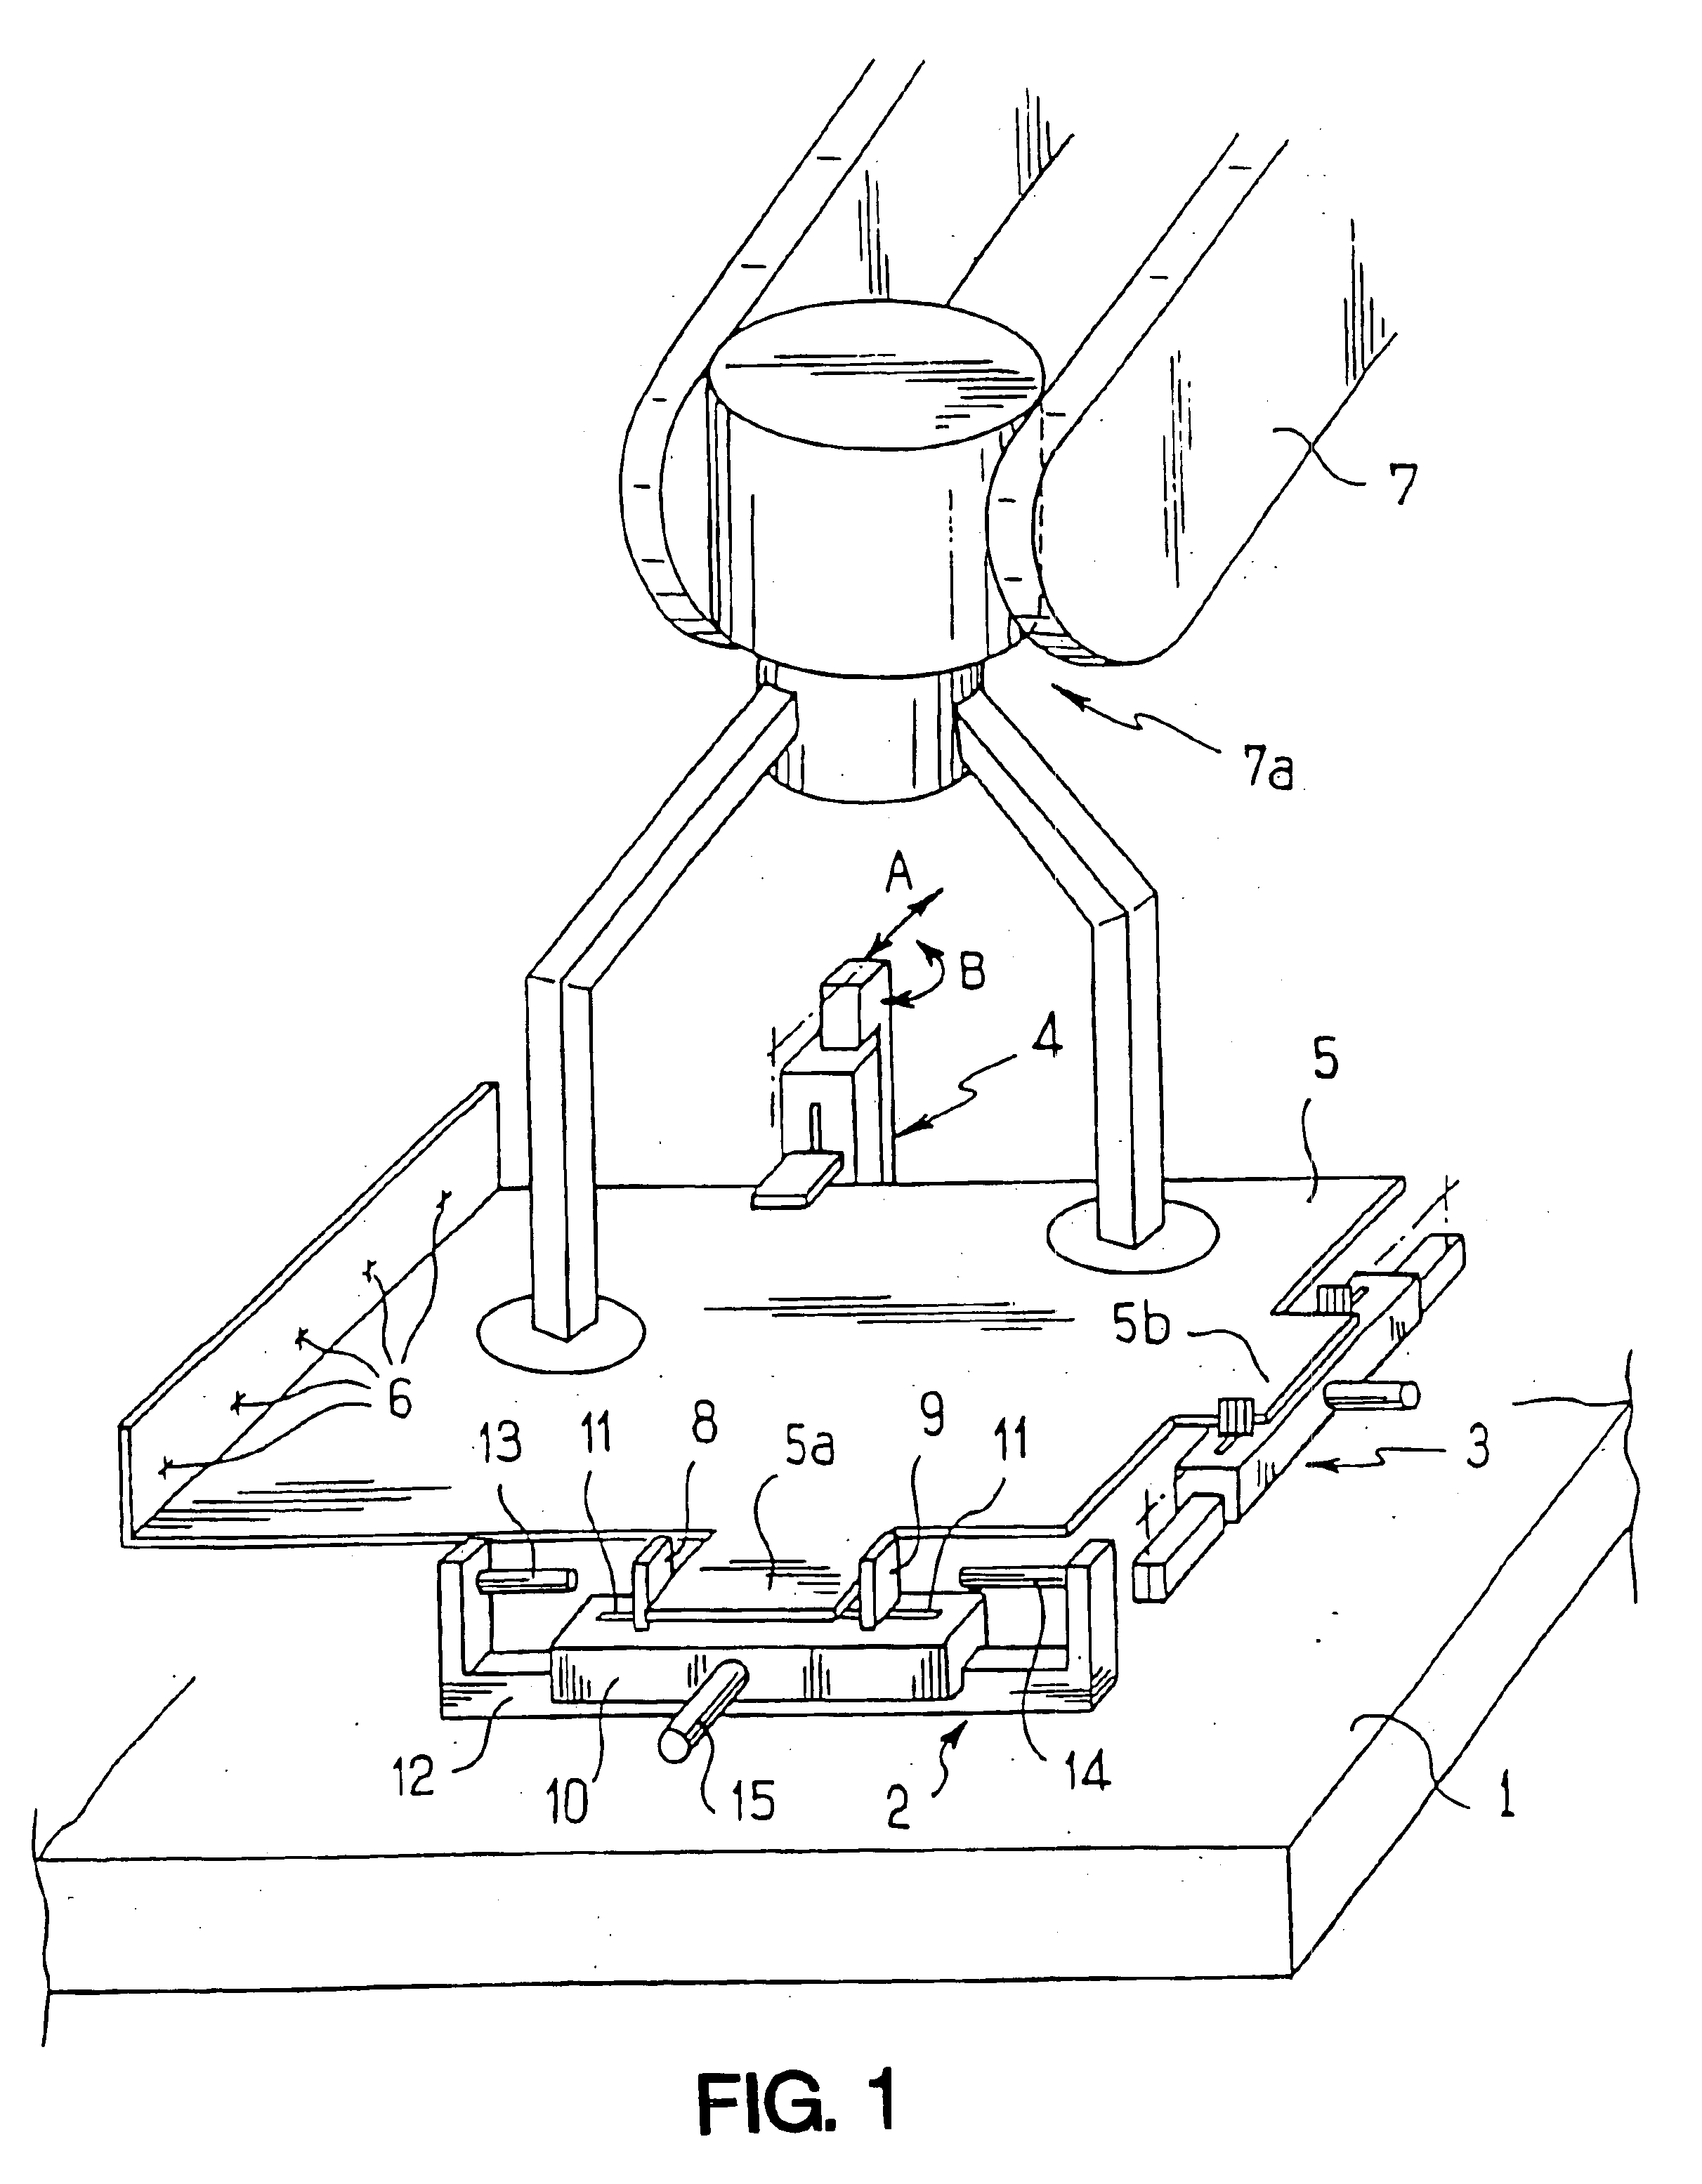 Method of holding a part in position in an assembly station